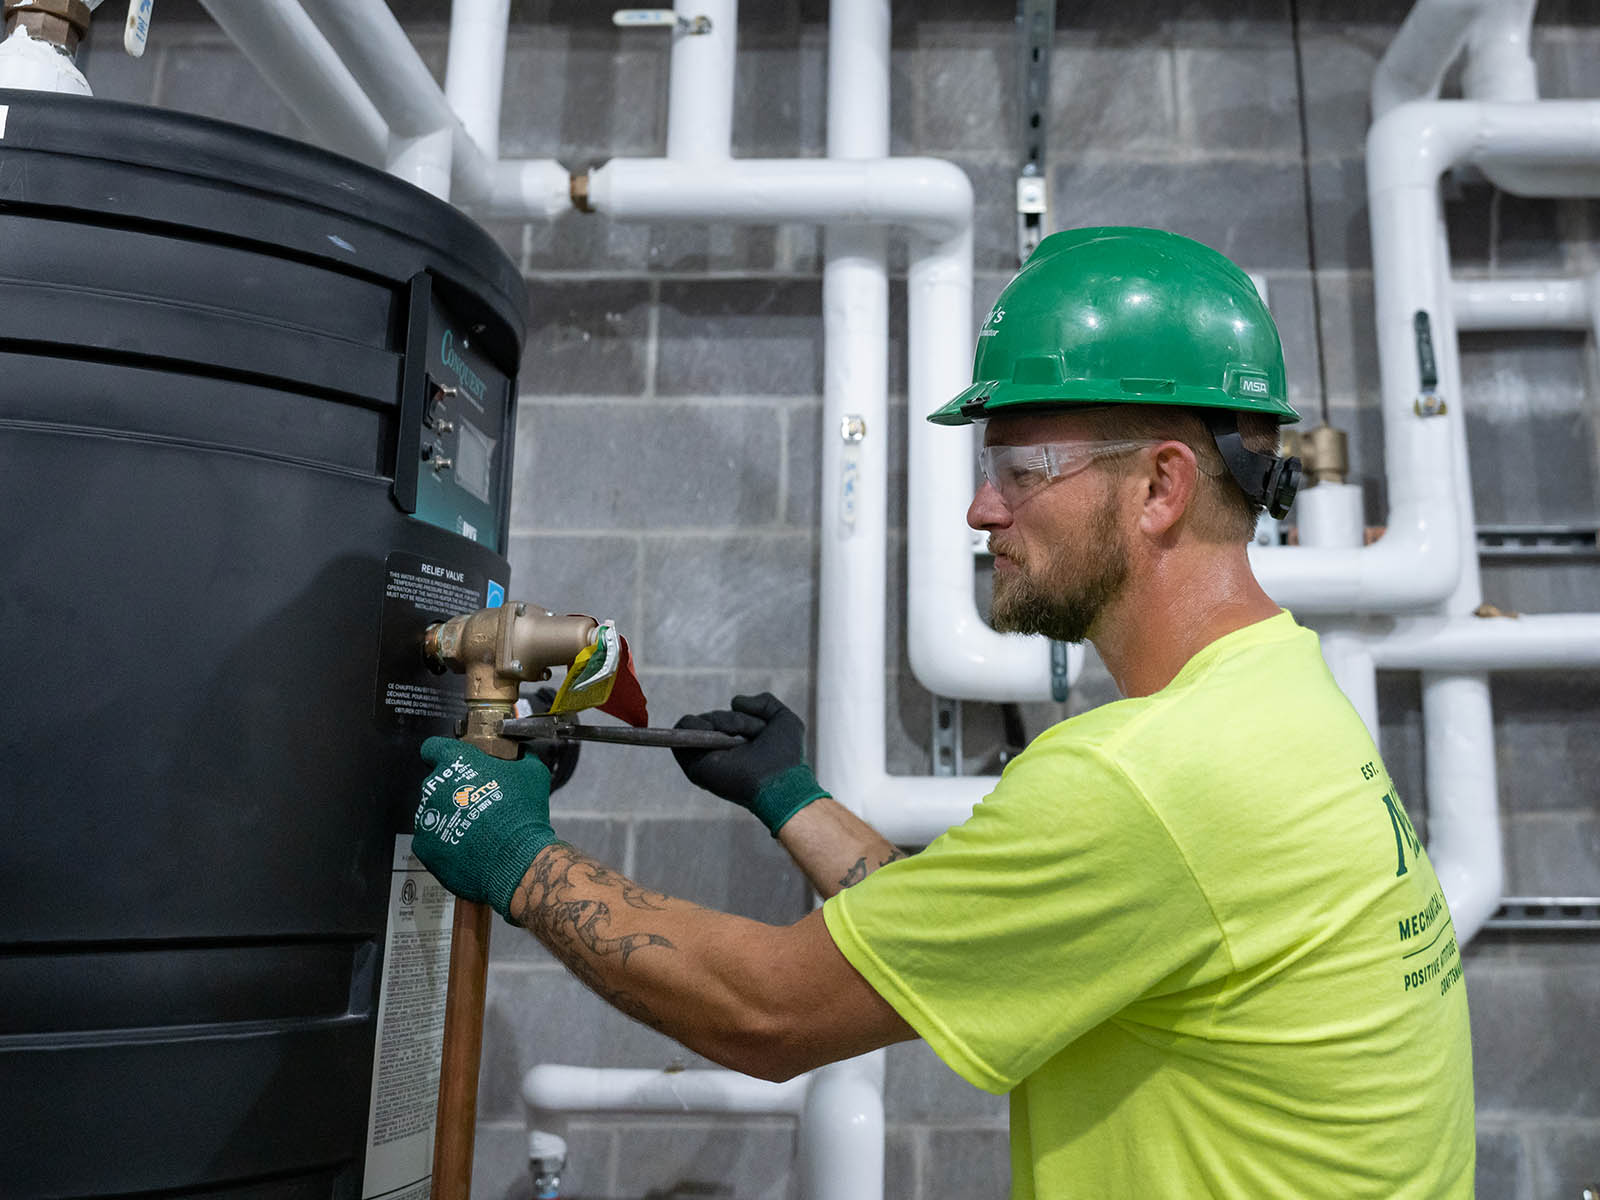 David Dwyer, McElroy’s plumbing/pipefitting foreman, works on a boiler connection in a new, Lawrence, Kansas medical facility.